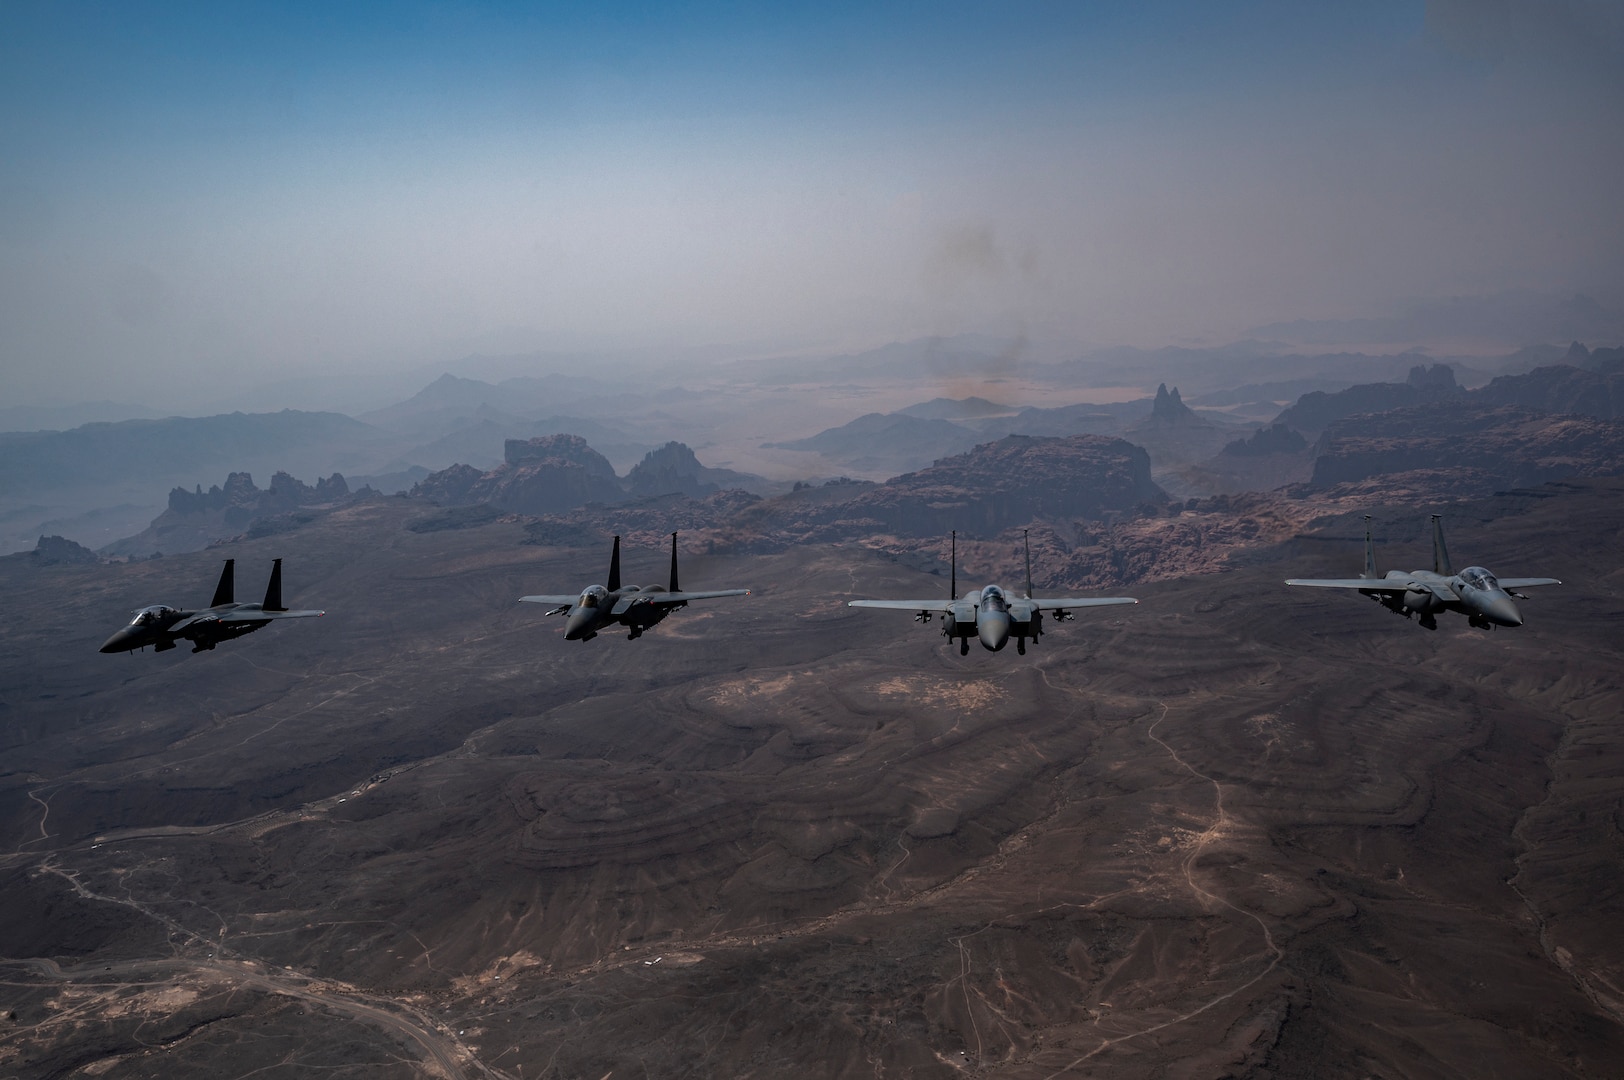 U.S. Air Force F-15E Strike Eagles, assigned to the 335th Expeditionary Fighter Squadron, fly alongside Saudi Arabian Air Force F-15E Strike Eagles during Operation Agile Spartan III within the U.S. Central Command area of responsibility, Sep. 5, 2022. OAS III tested Ninth Air Force (Air Forces Central)’s ability to execute rapid troop and equipment movement to and from dispersed locations around the U.S. Central Command area of responsibility region. This kind of joint training enhances international partnership and interoperability in the interest of regional security. (U.S. Air Force photo by Staff Sgt. Christian Sullivan)